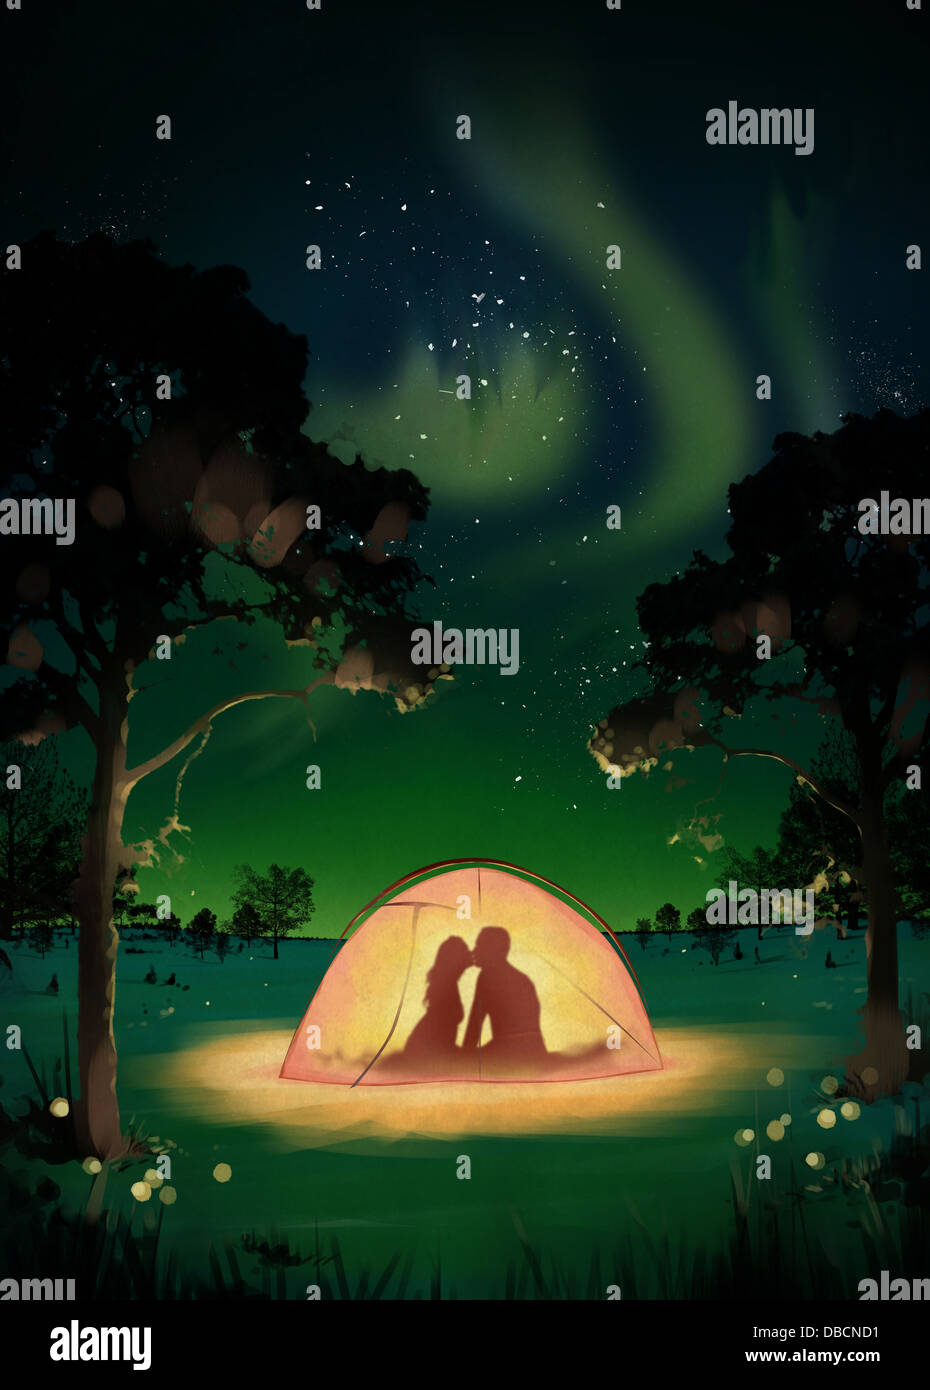 Illustration of couple kissing in tent at dawn Stock Photo